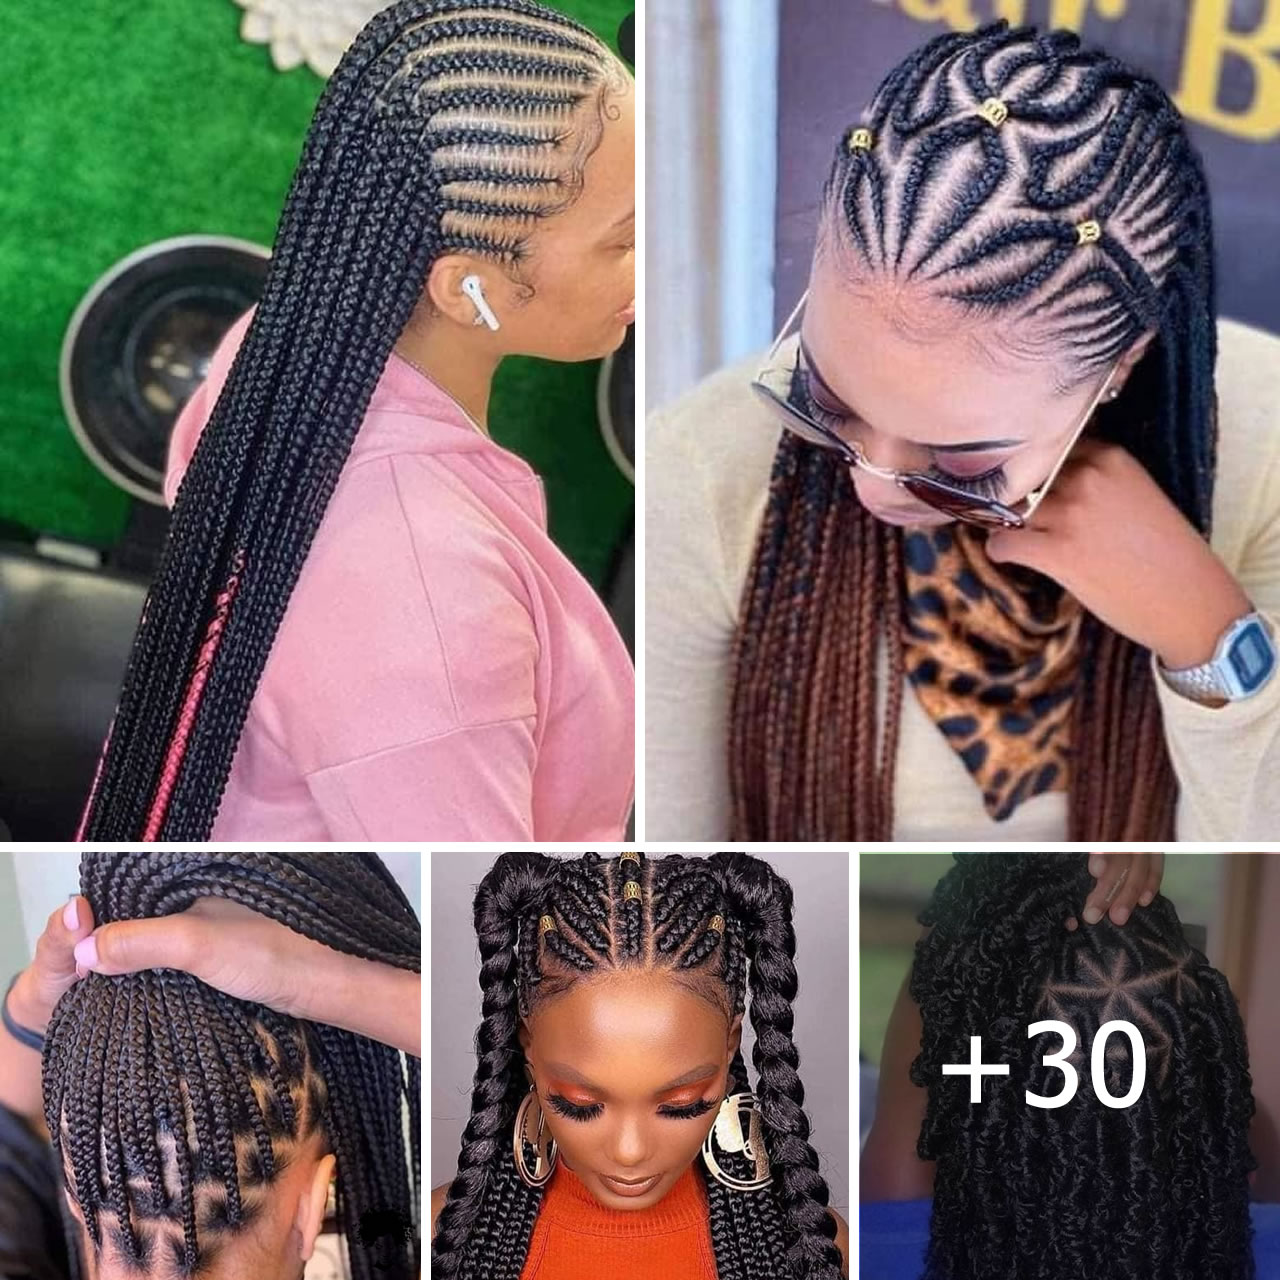 Stylish Recent Braided Hairstyles You Should Consider Volume 2